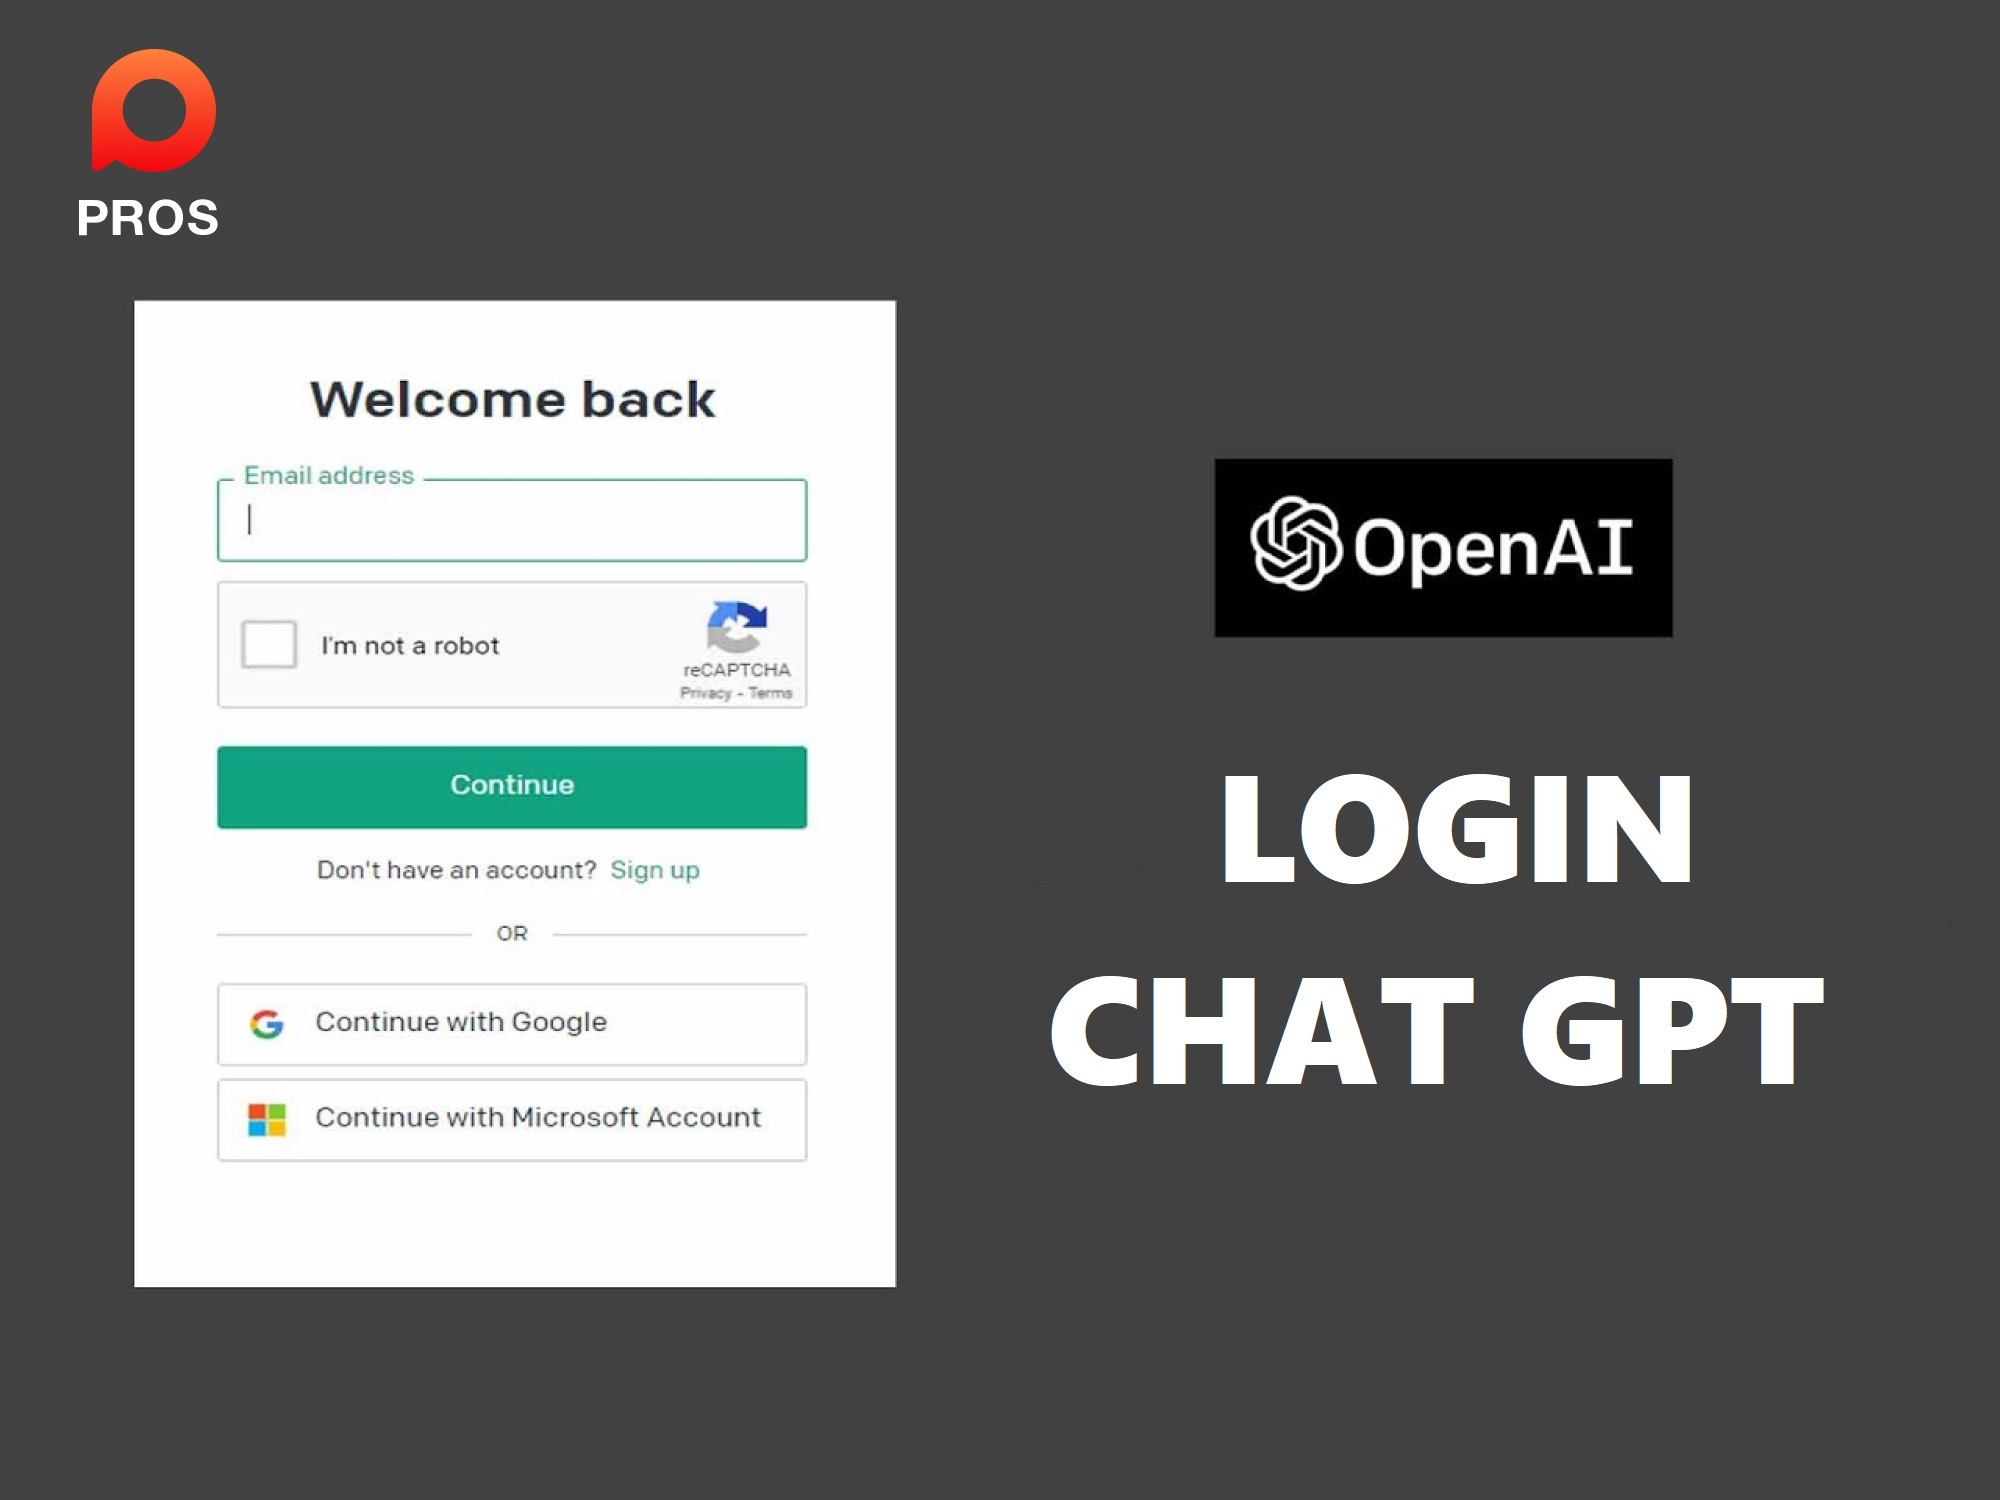 Login Chat GPT to access facilities